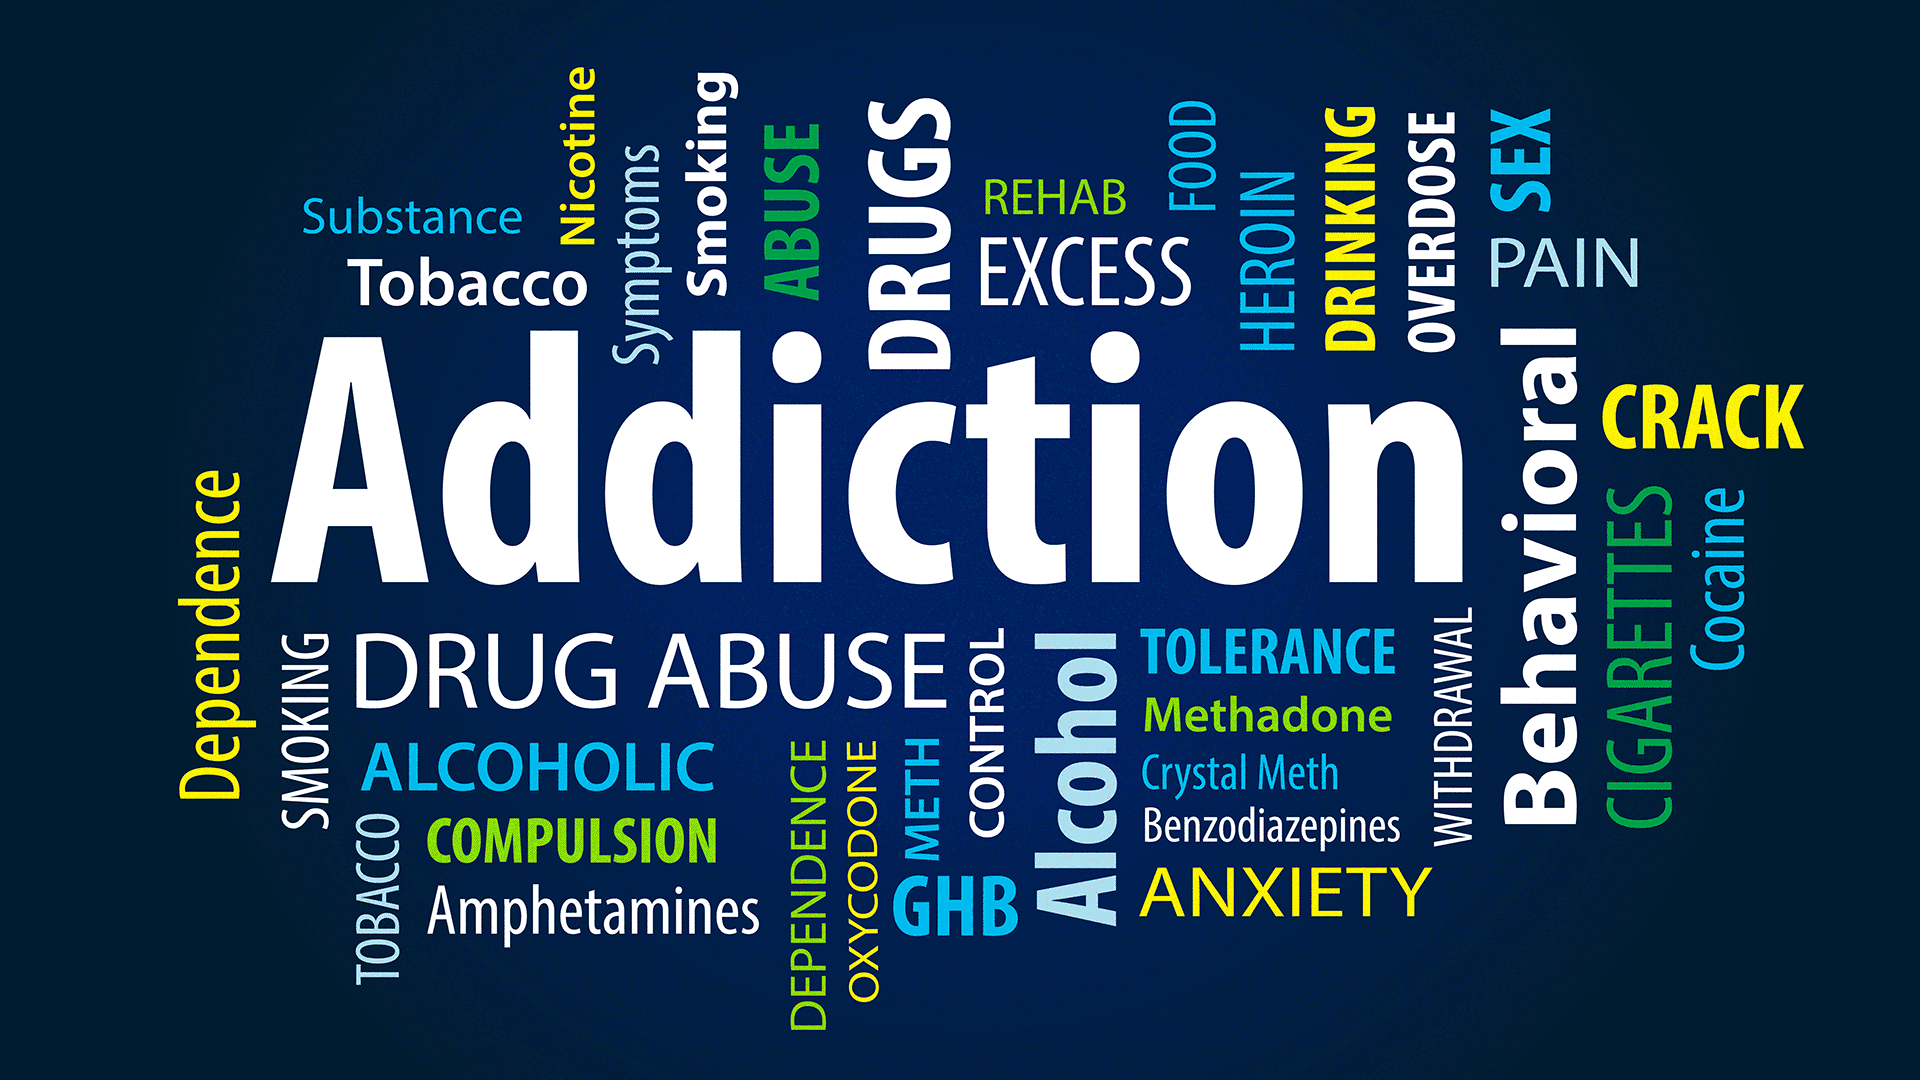 wordcloud illustration related to addiction